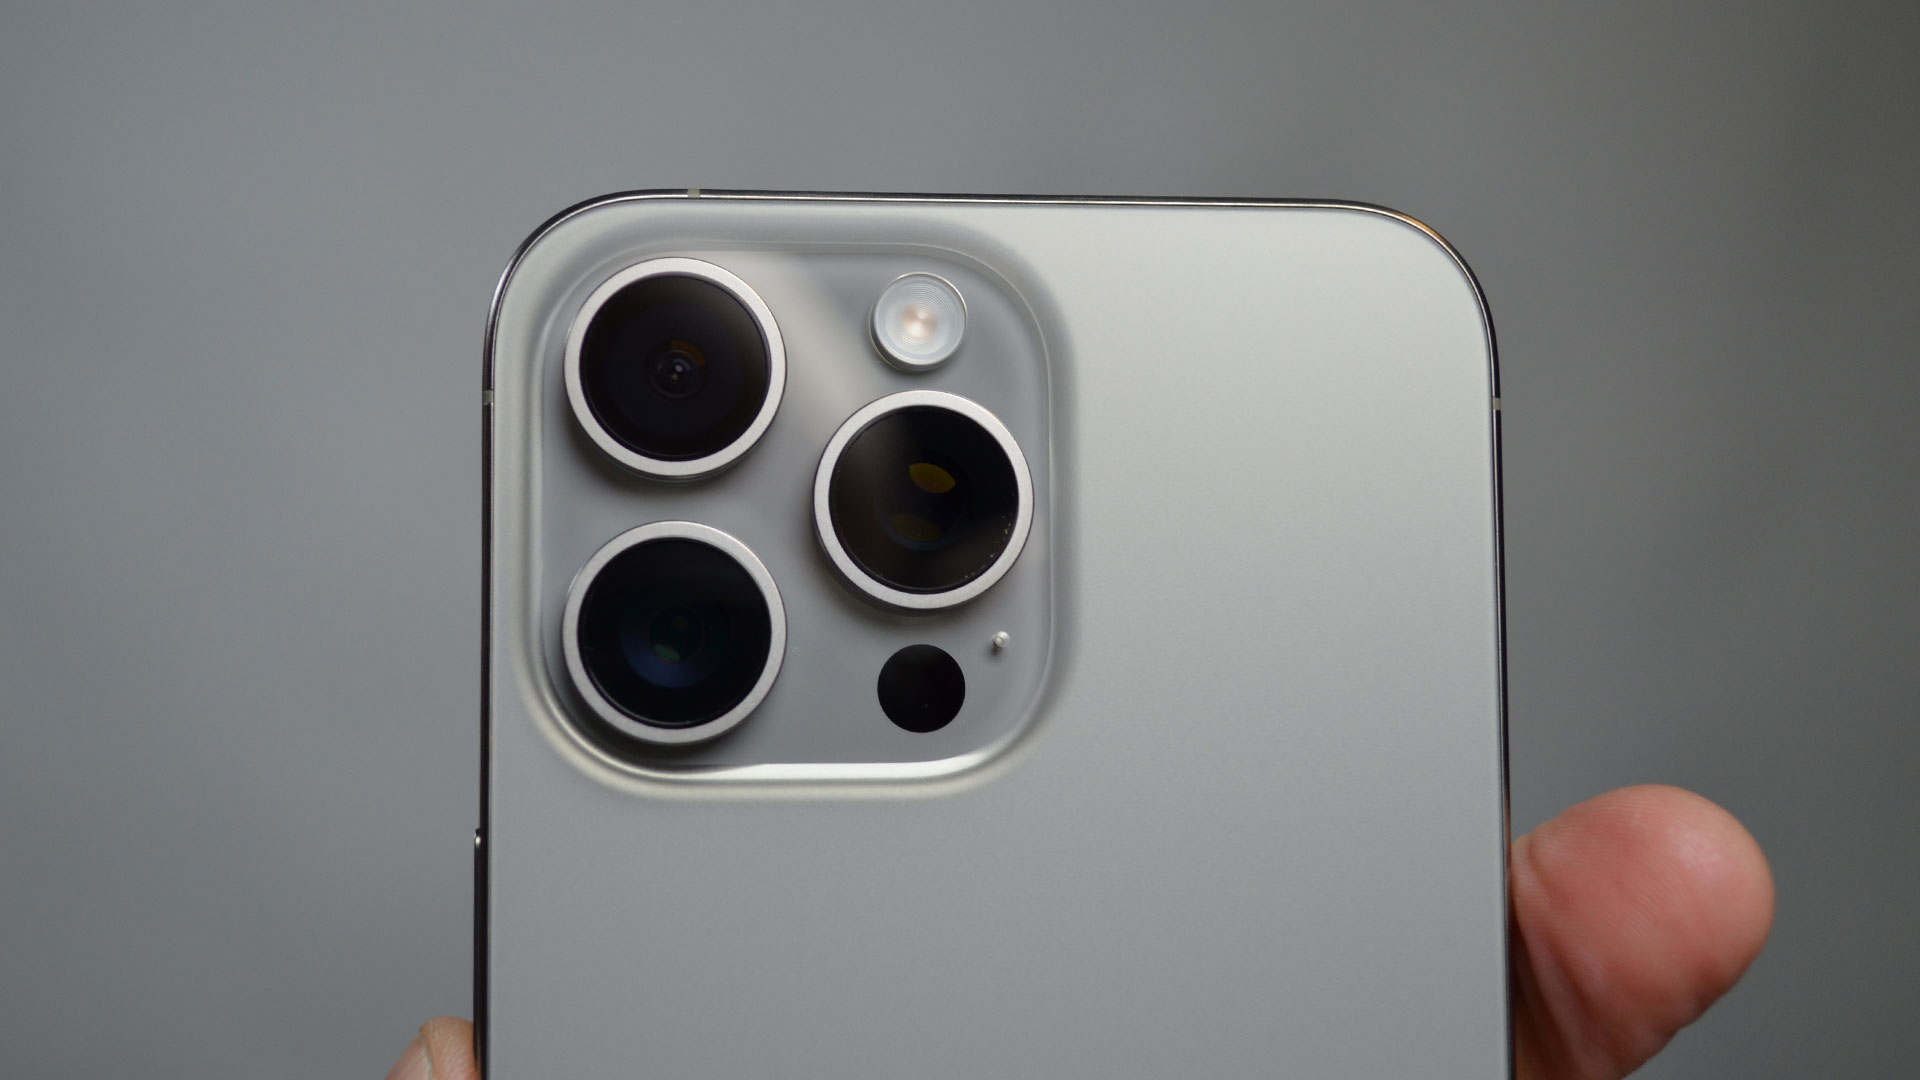 Pro models may include a 48MP Periscope lens, significantly upgrading camera capabilities